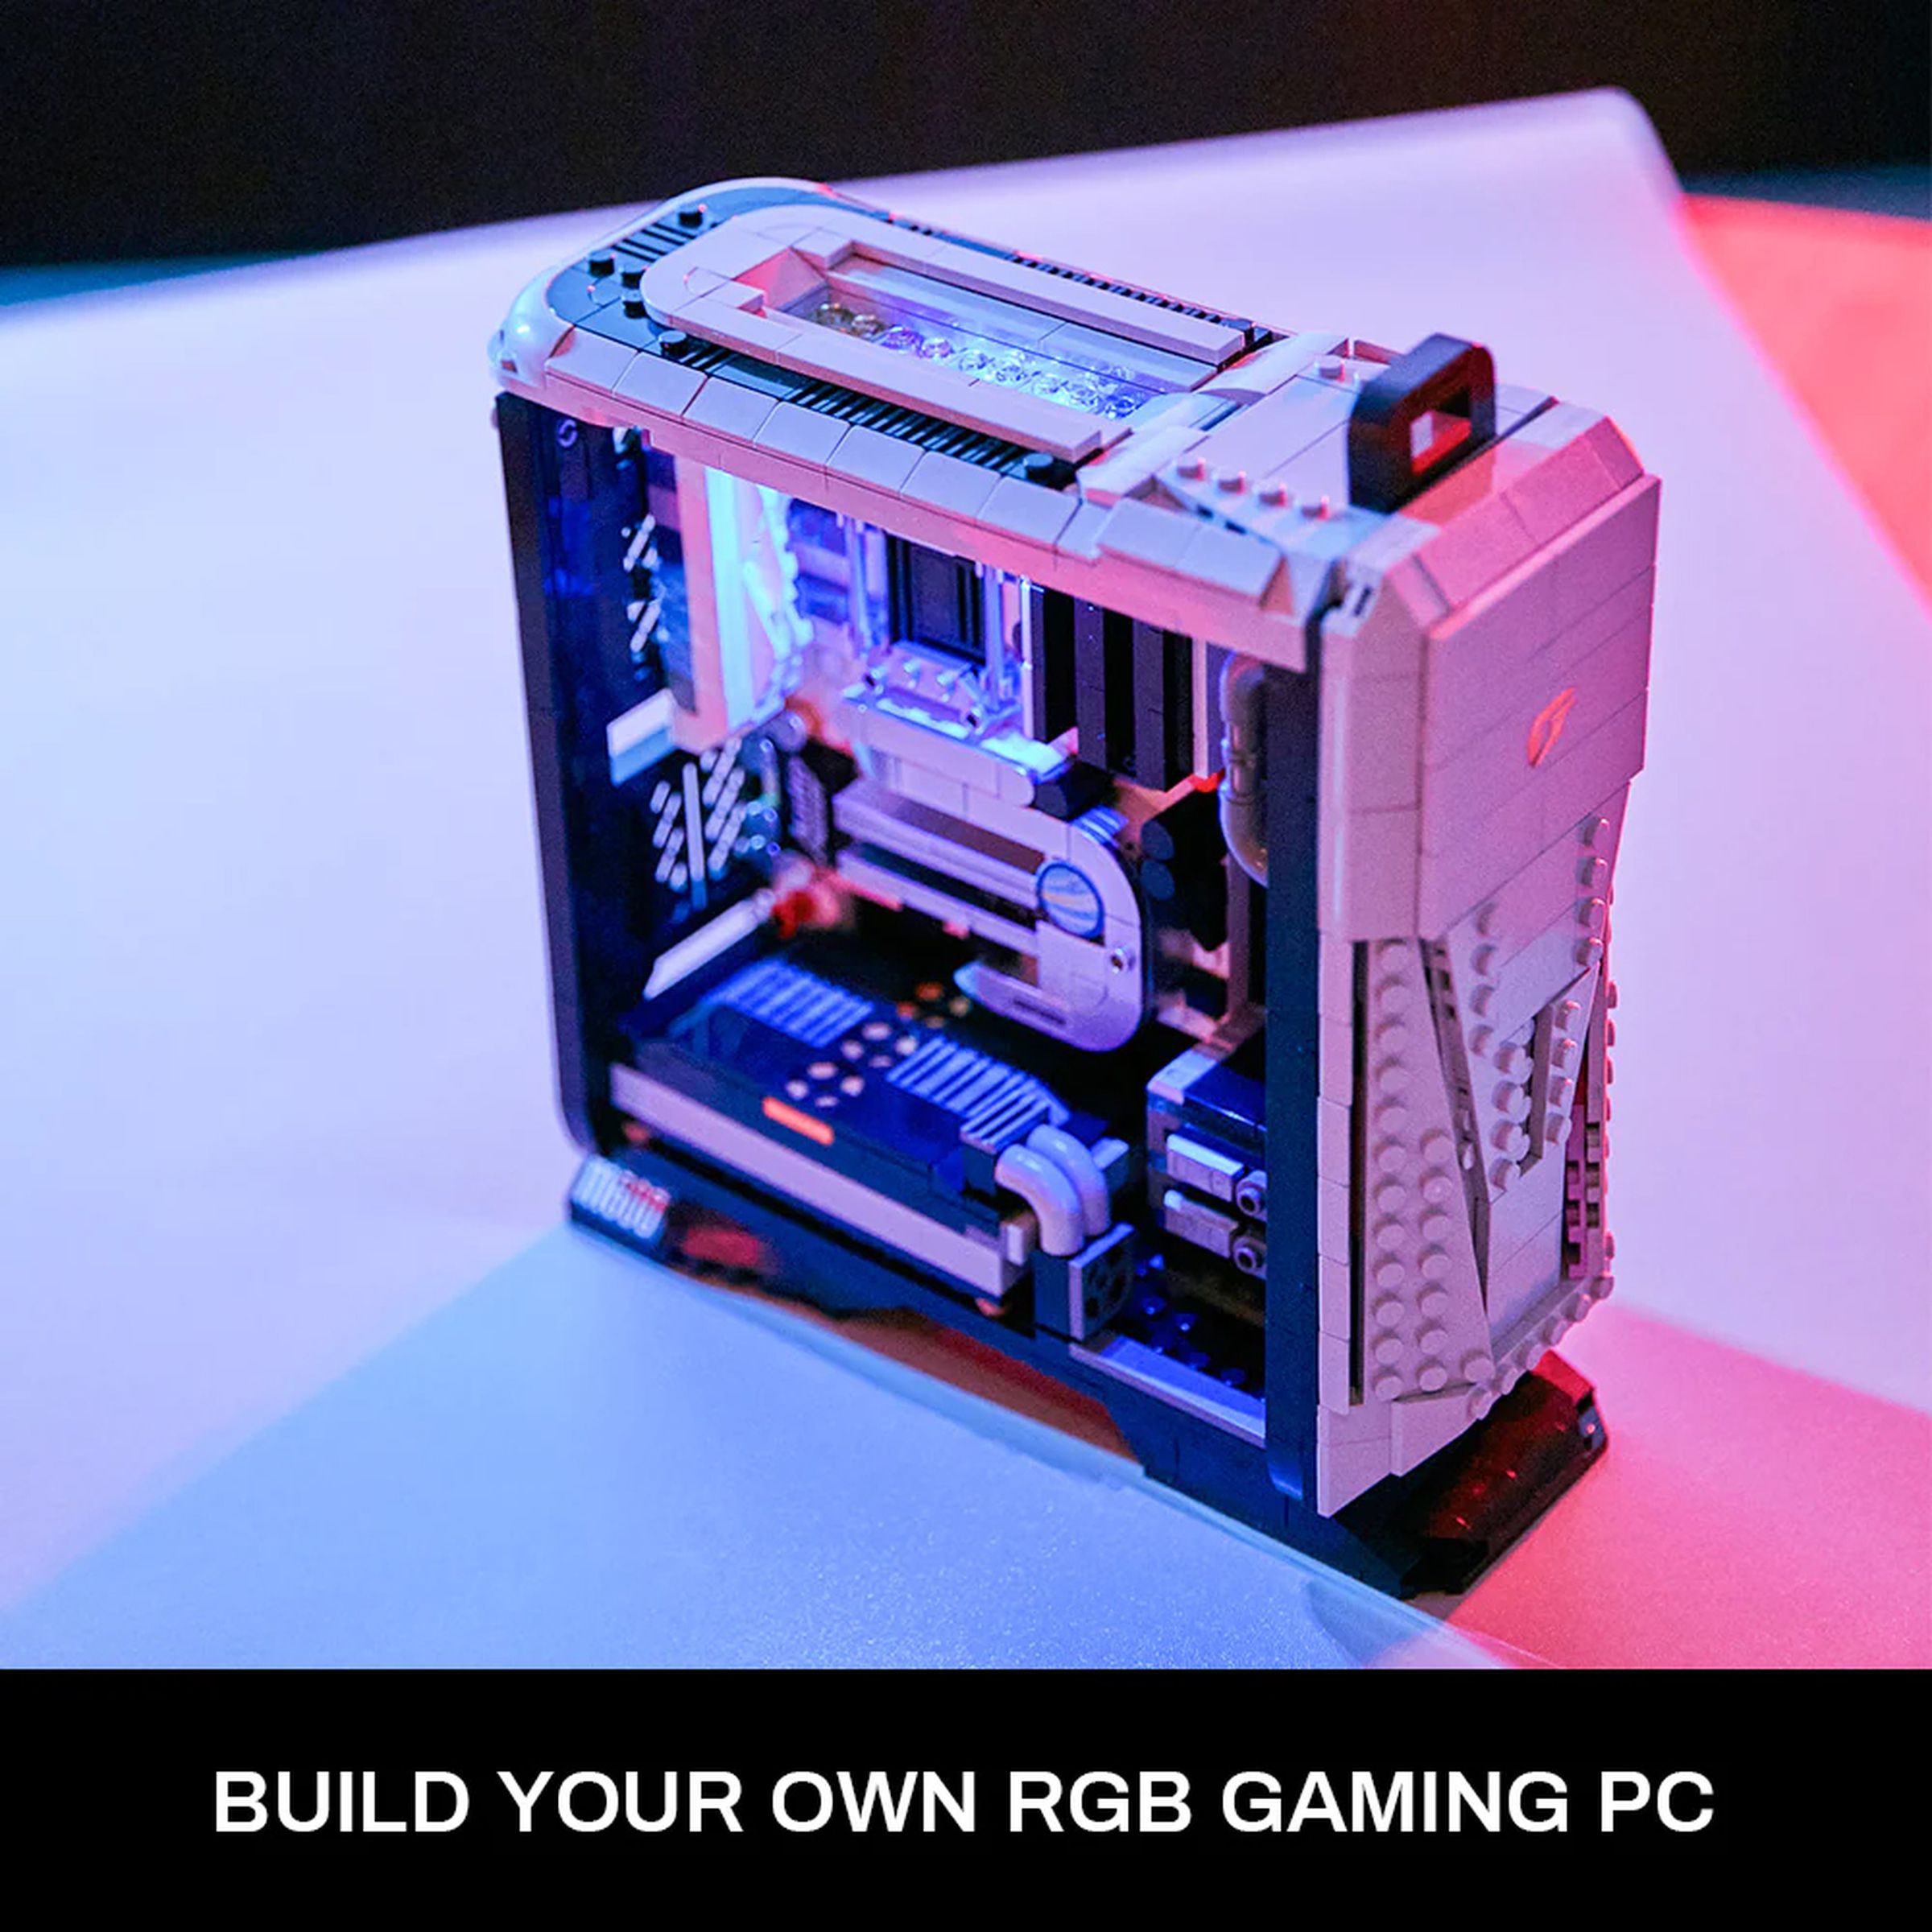 Press photo of a miniature gaming desktop model made out of Lego-like bricks. The model is mostly gray-colored with typical gamery accents, including RGB lighting and little brick models of a motherboard, graphics card, PSU, and storage drives.